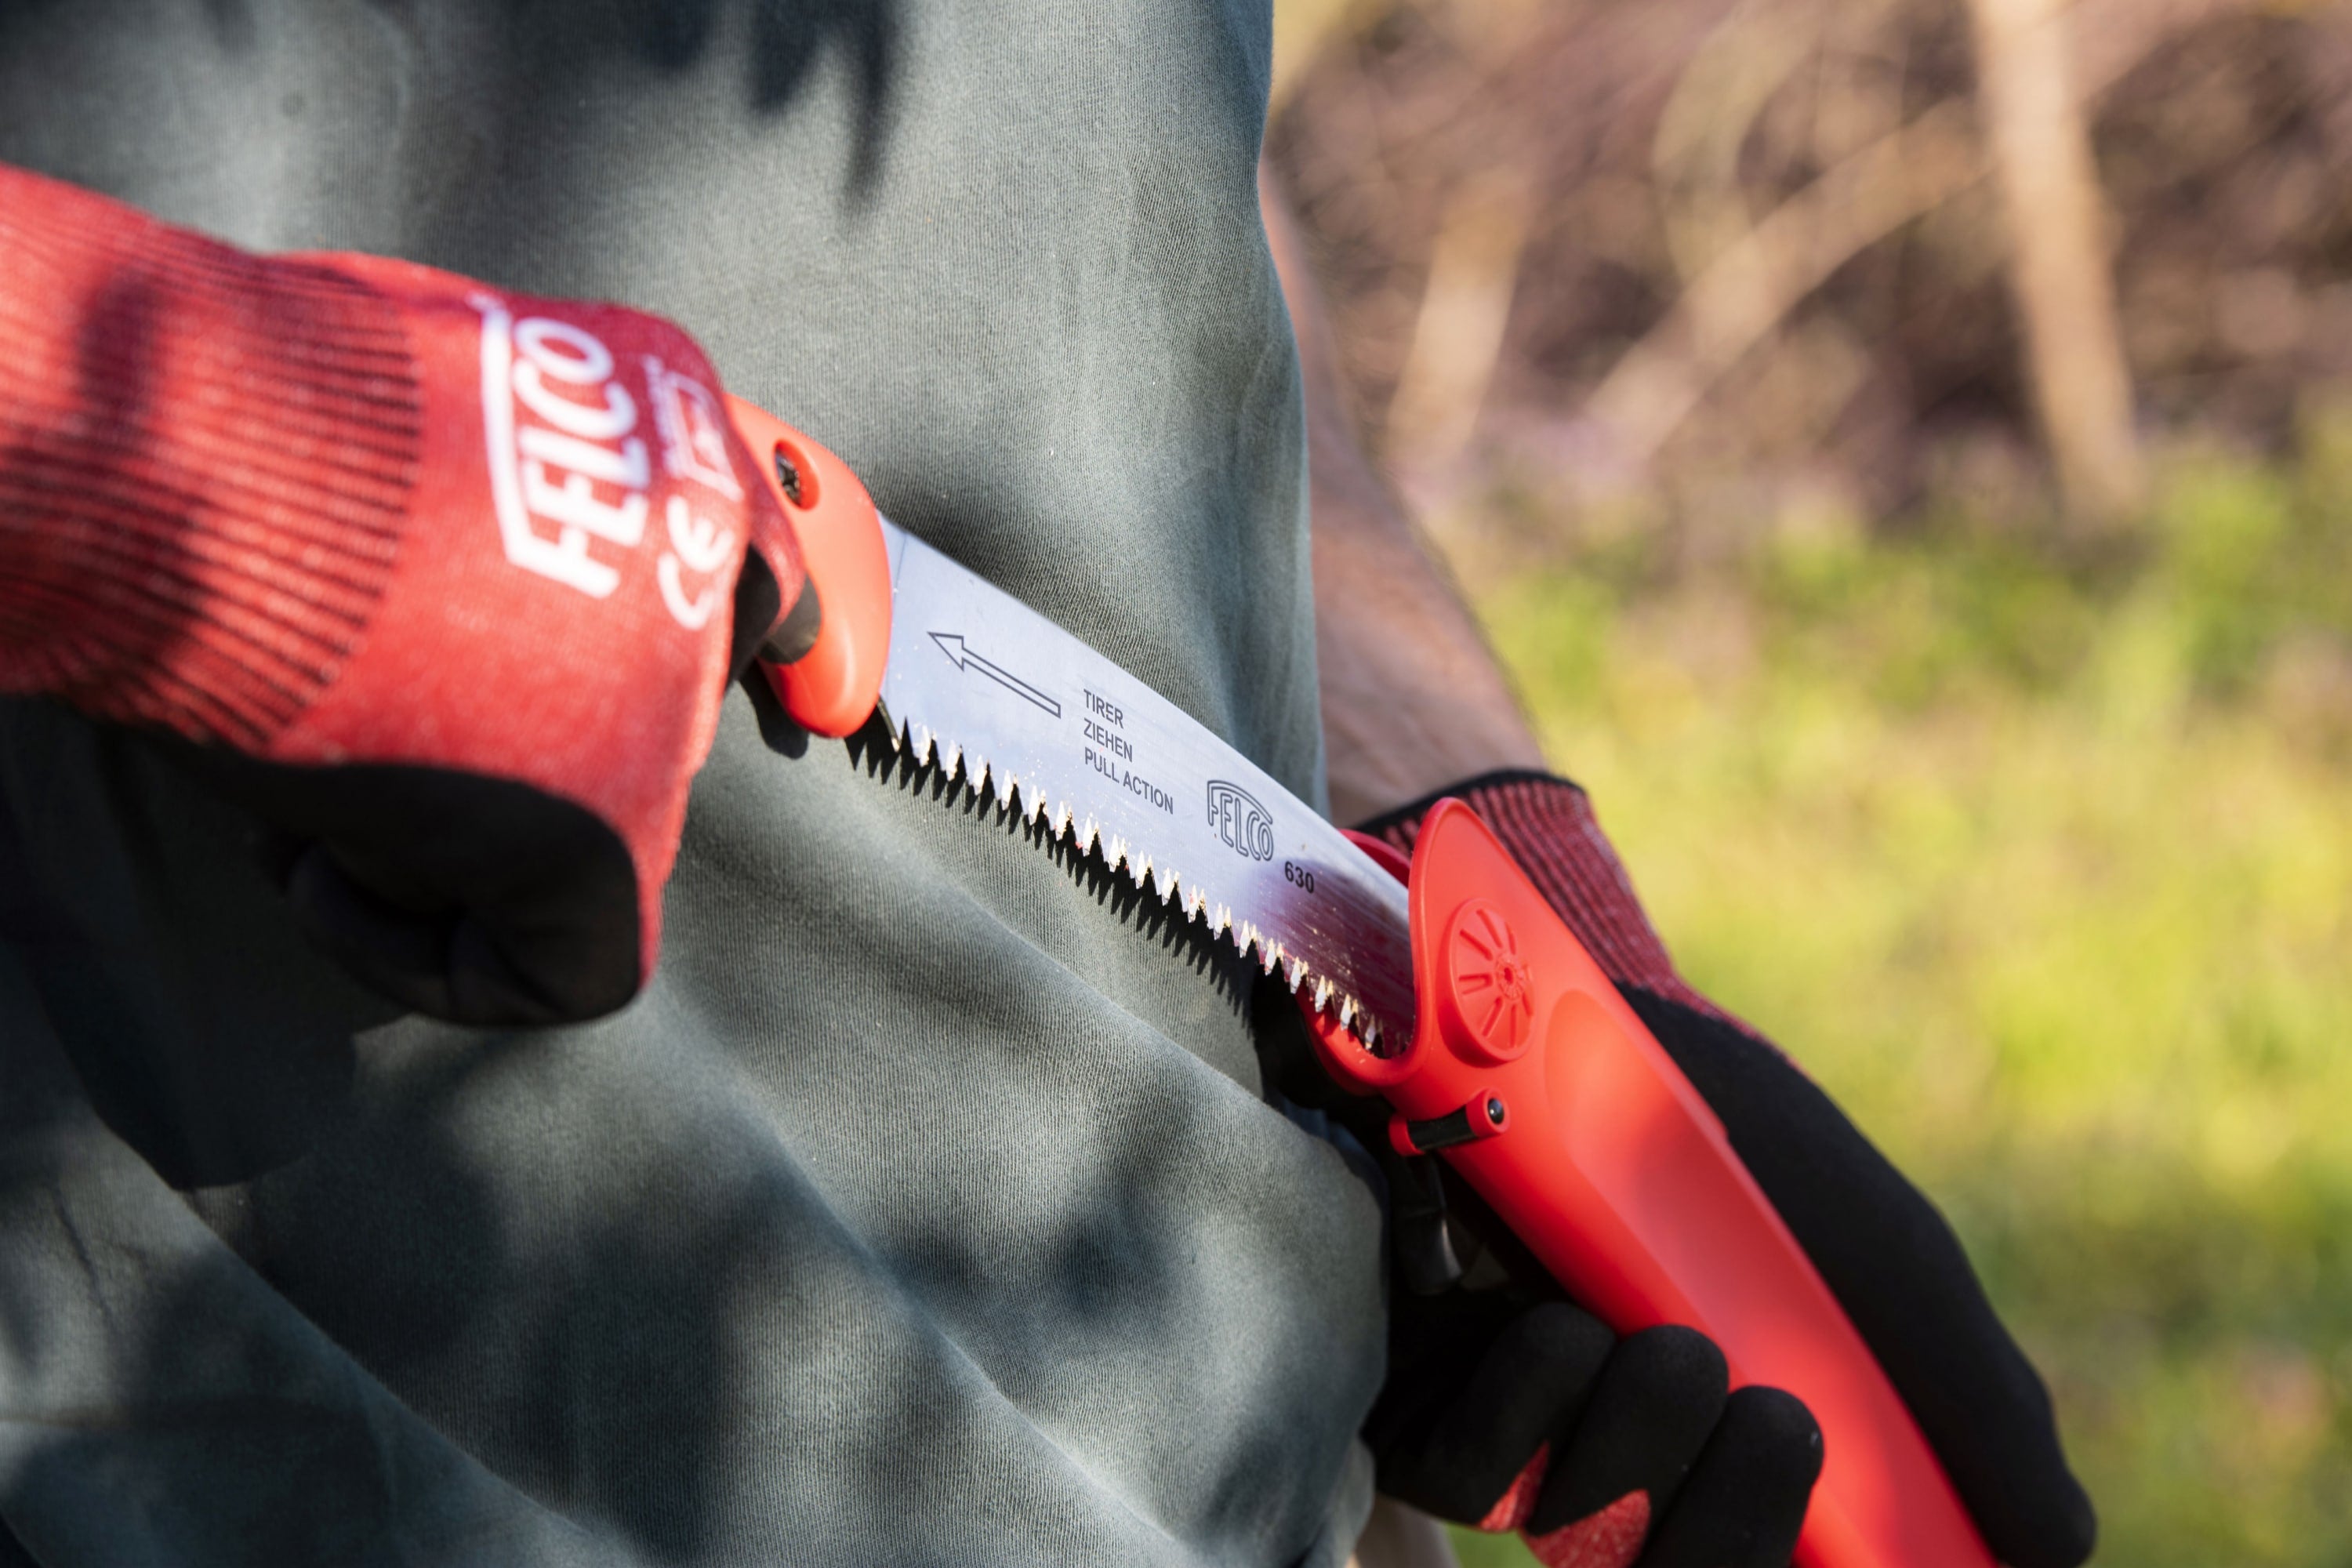 Pull-stroke pruning saws